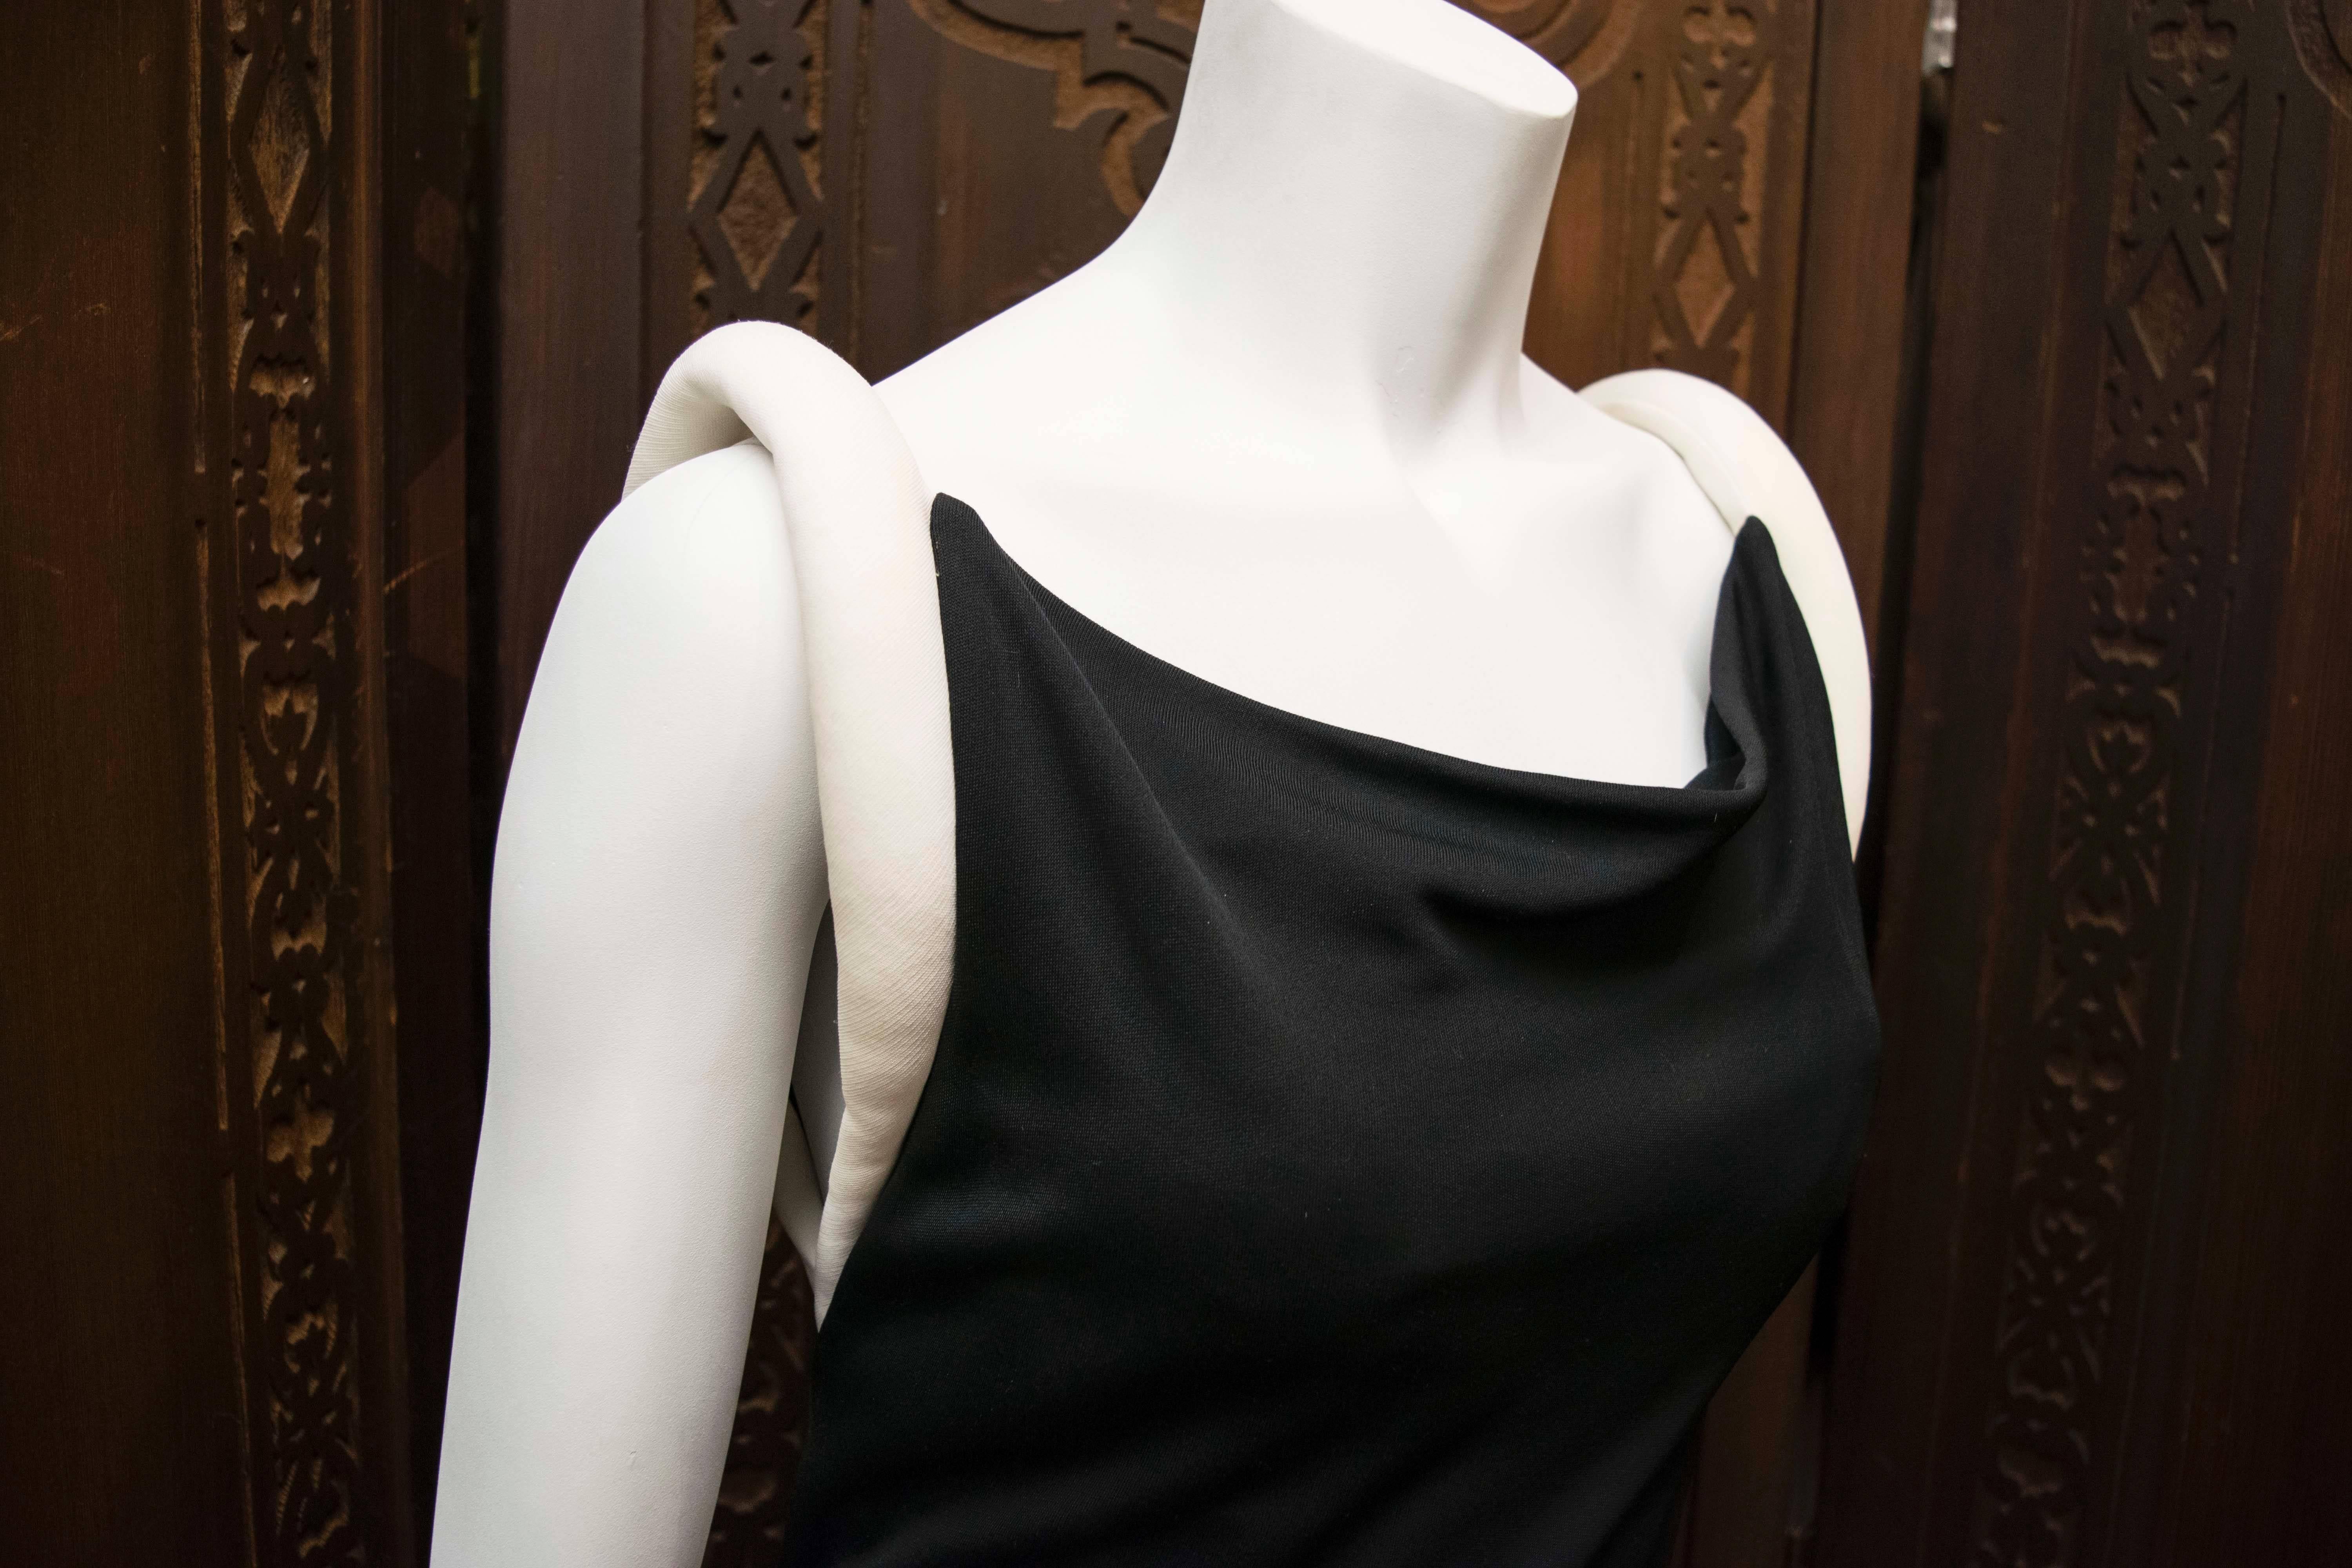 1980s Giani Versace Couture Black Cocktail Dress.
An interesting vintage Giani Versace black cocktail dress. This piece feels both retro and current at the same time, and is a wonderful piece of wearable fashion memorabilia.

B 30
W 28
H 34
L